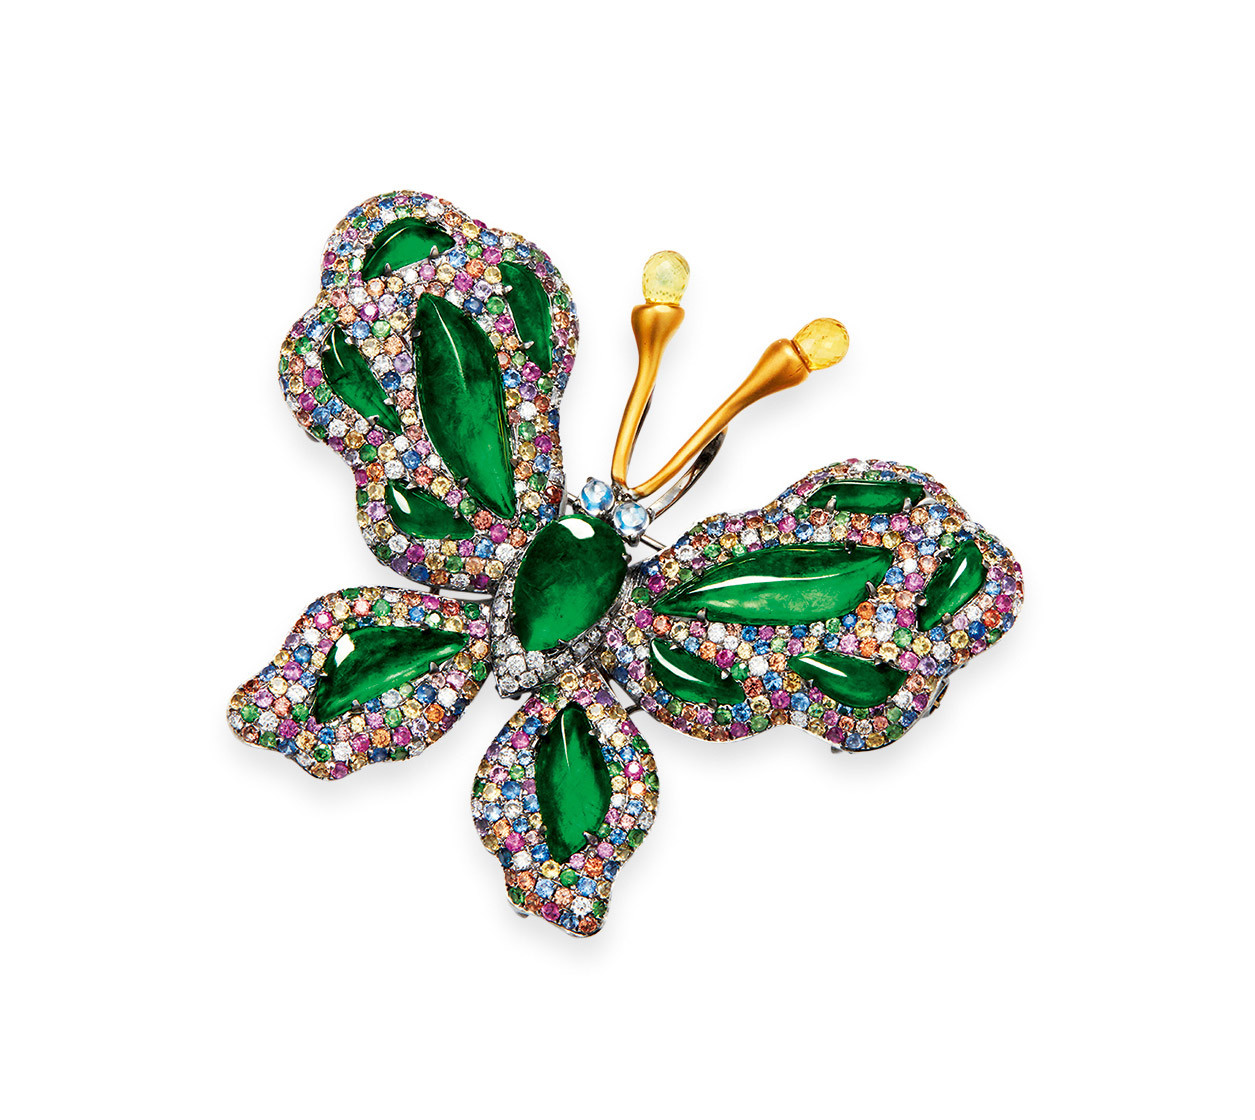 A JADEITE, DIAMOND AND COLORED STONE ’BUTTERFLY’ BROOCH